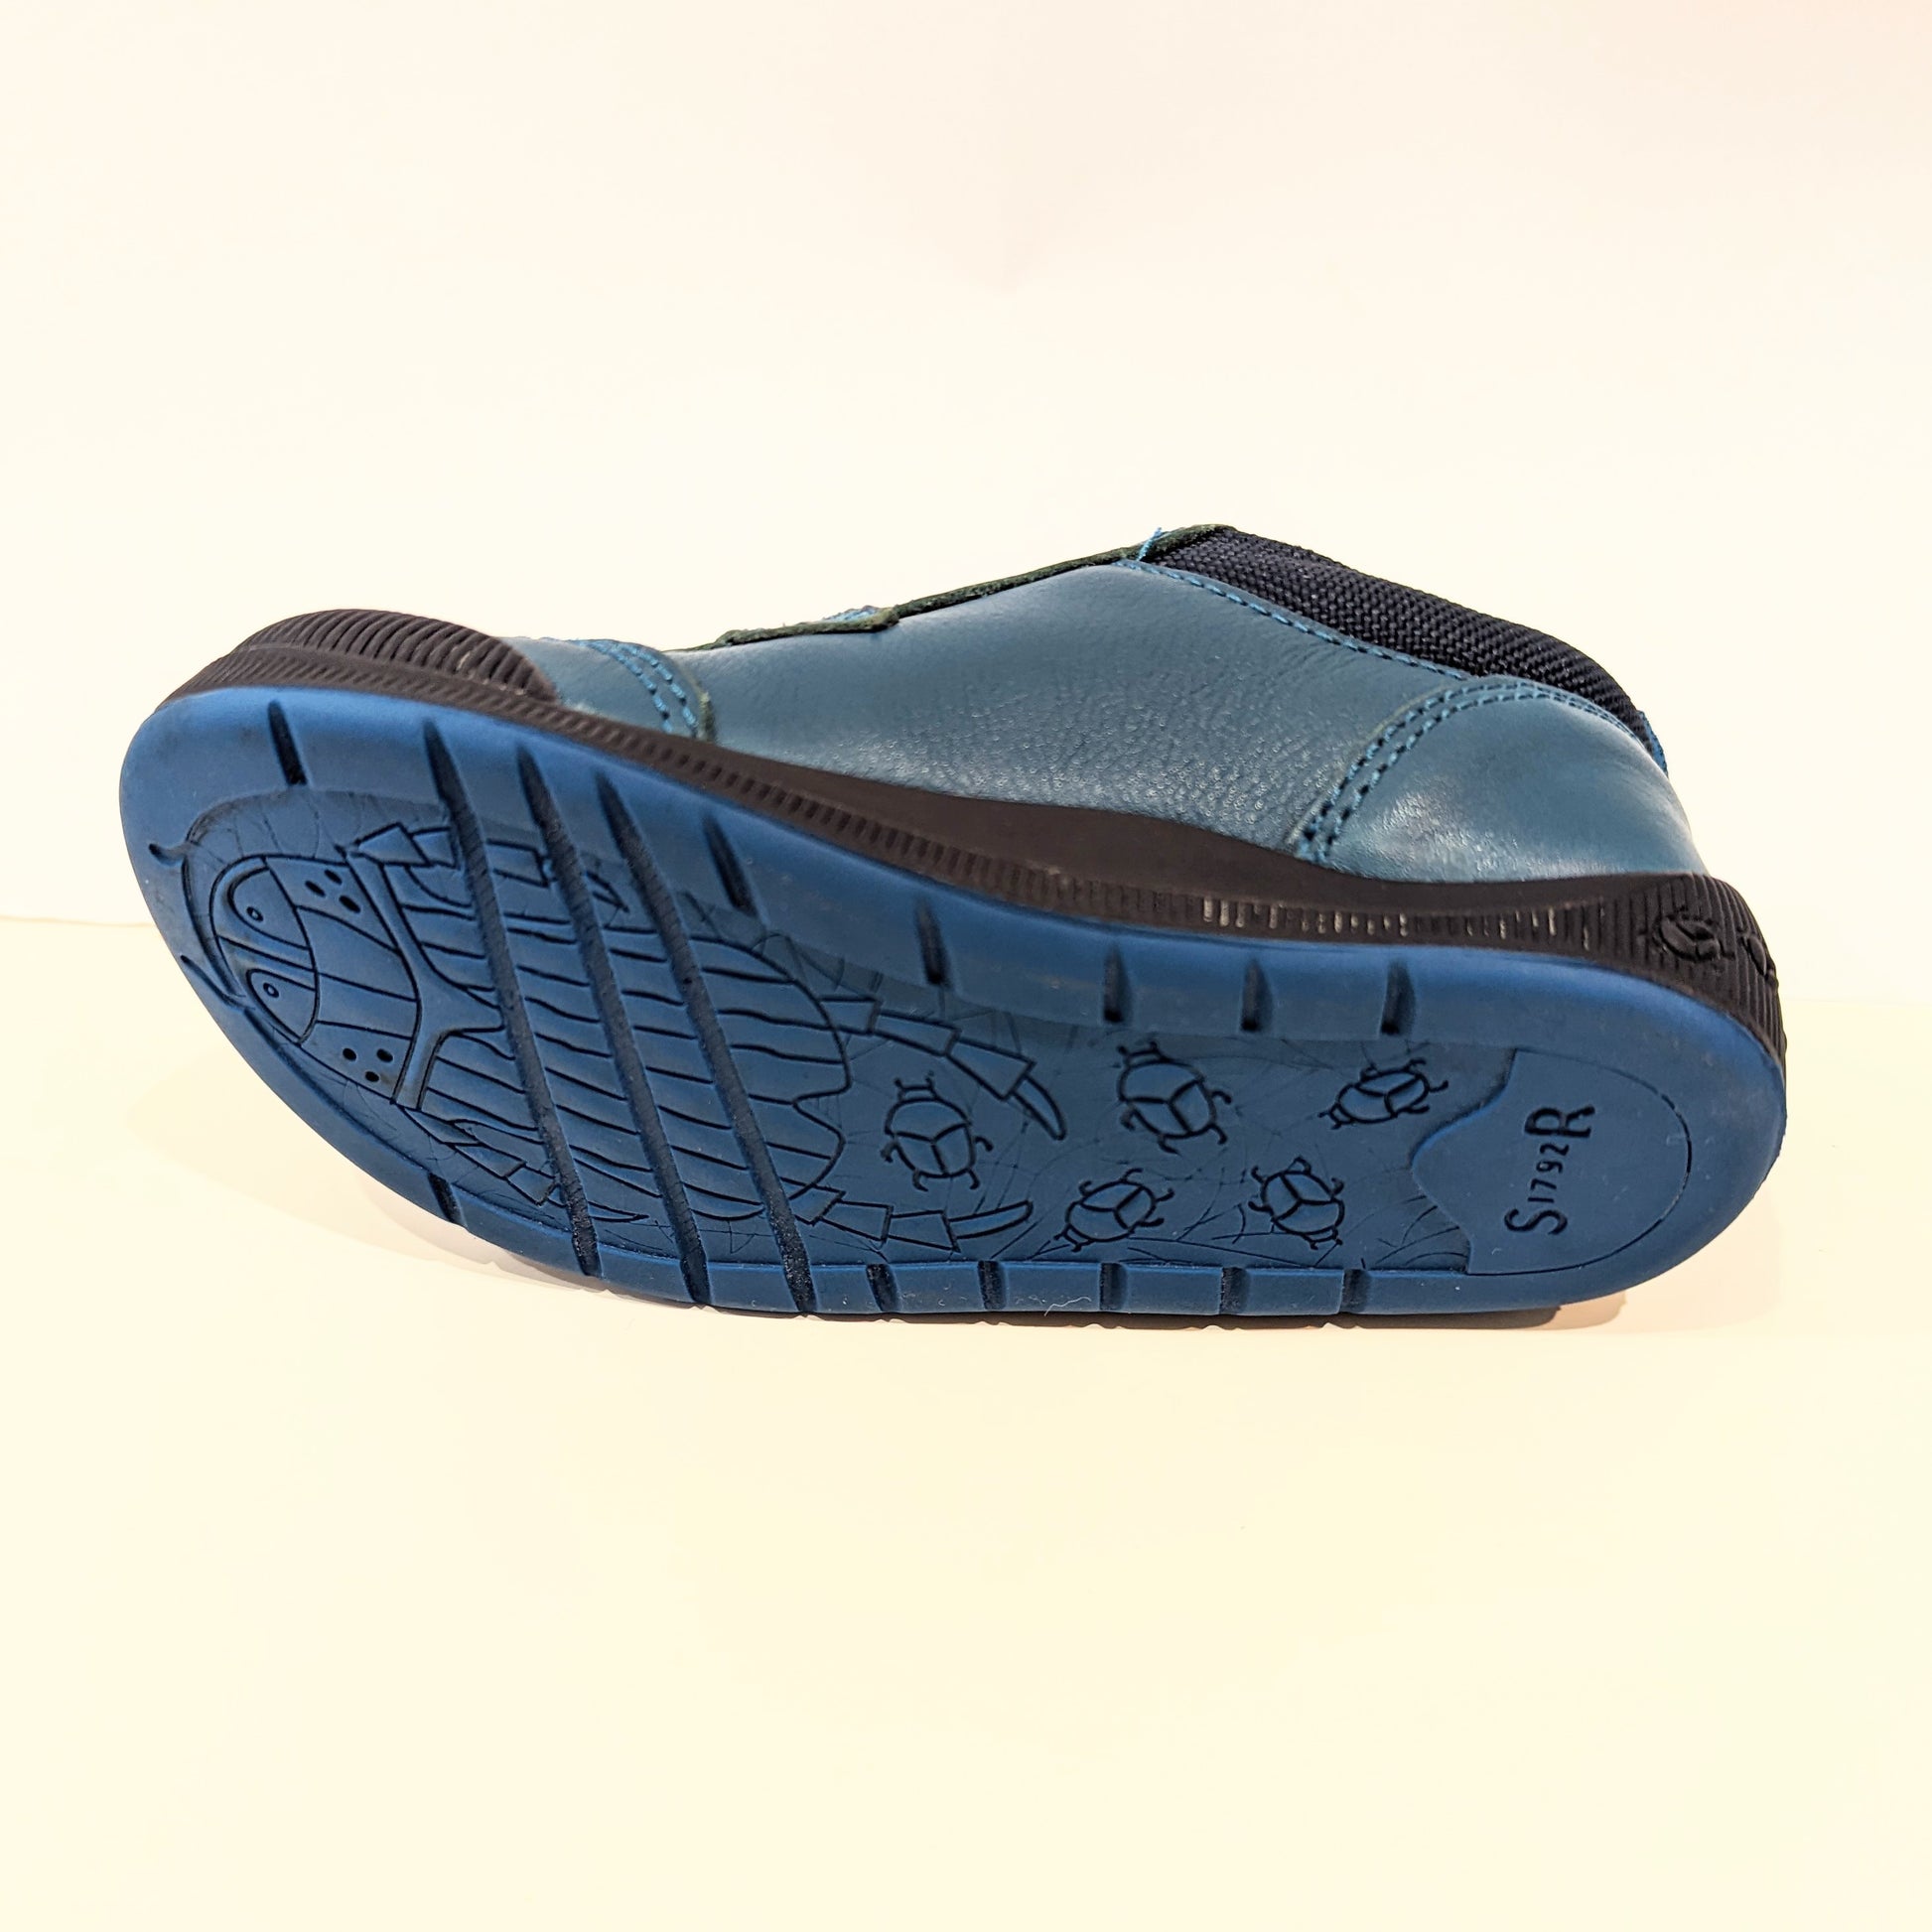 A boys casual shoe by Start Rite, style Tickle, in teal leather with double velcro fastening. Sole view.